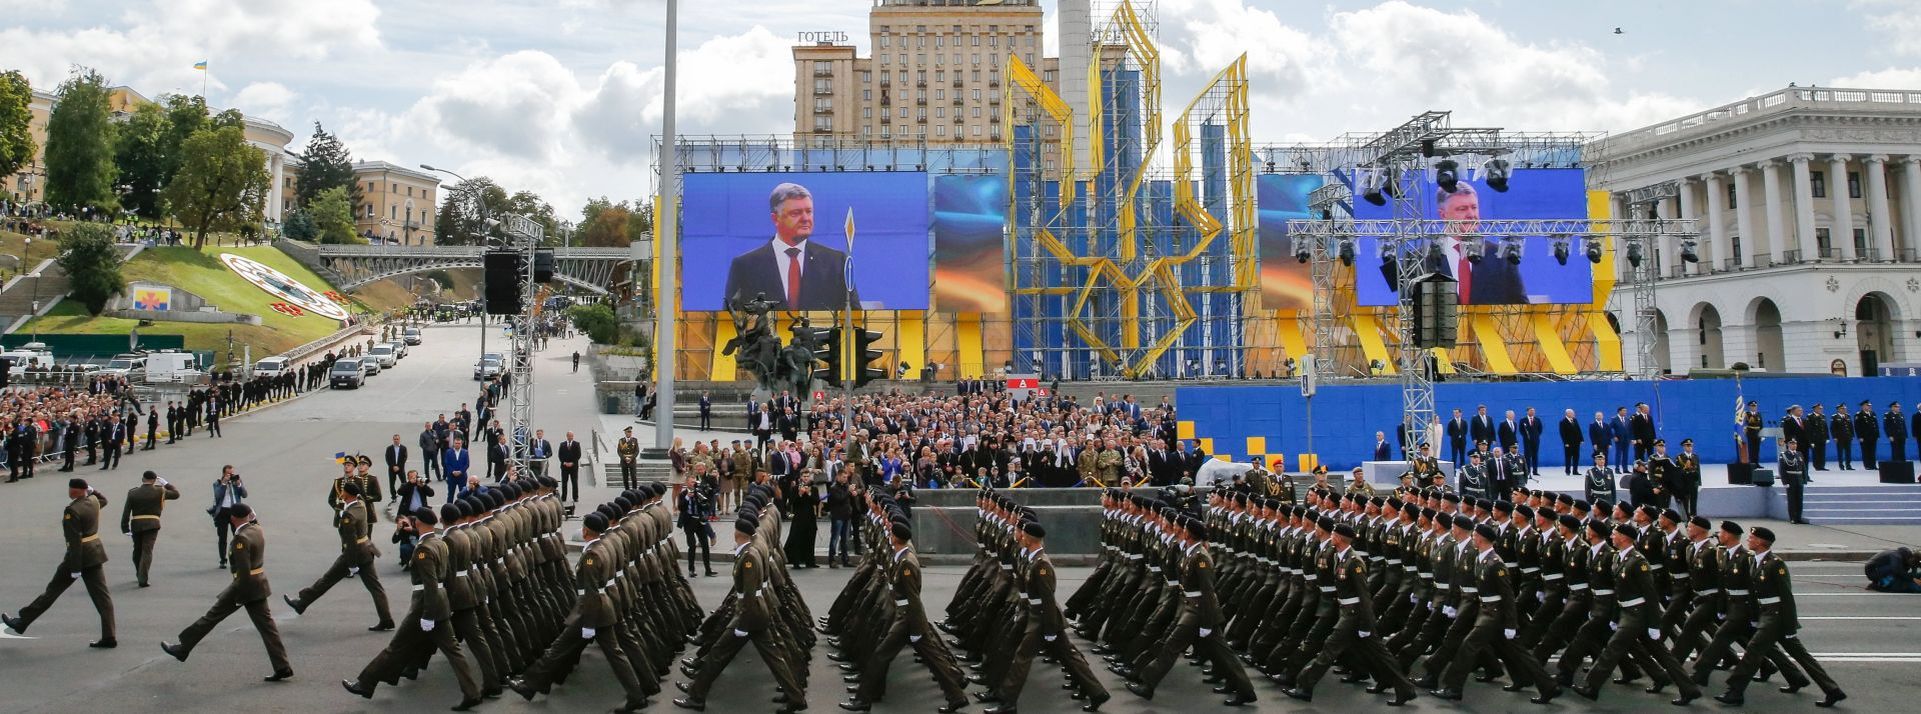 epa06159399 A Ukrainian Armed Forces military unit marches on Kiev's Independence Square, Ukraine, 24 August 2017, during a parade on the occasion of the country's 'Independence Day' celebrations. Ukrainians mark the 26th anniversary of Ukraine's independence from the Soviet Union in 1991.  EPA/SERGEY DOLZHENKO